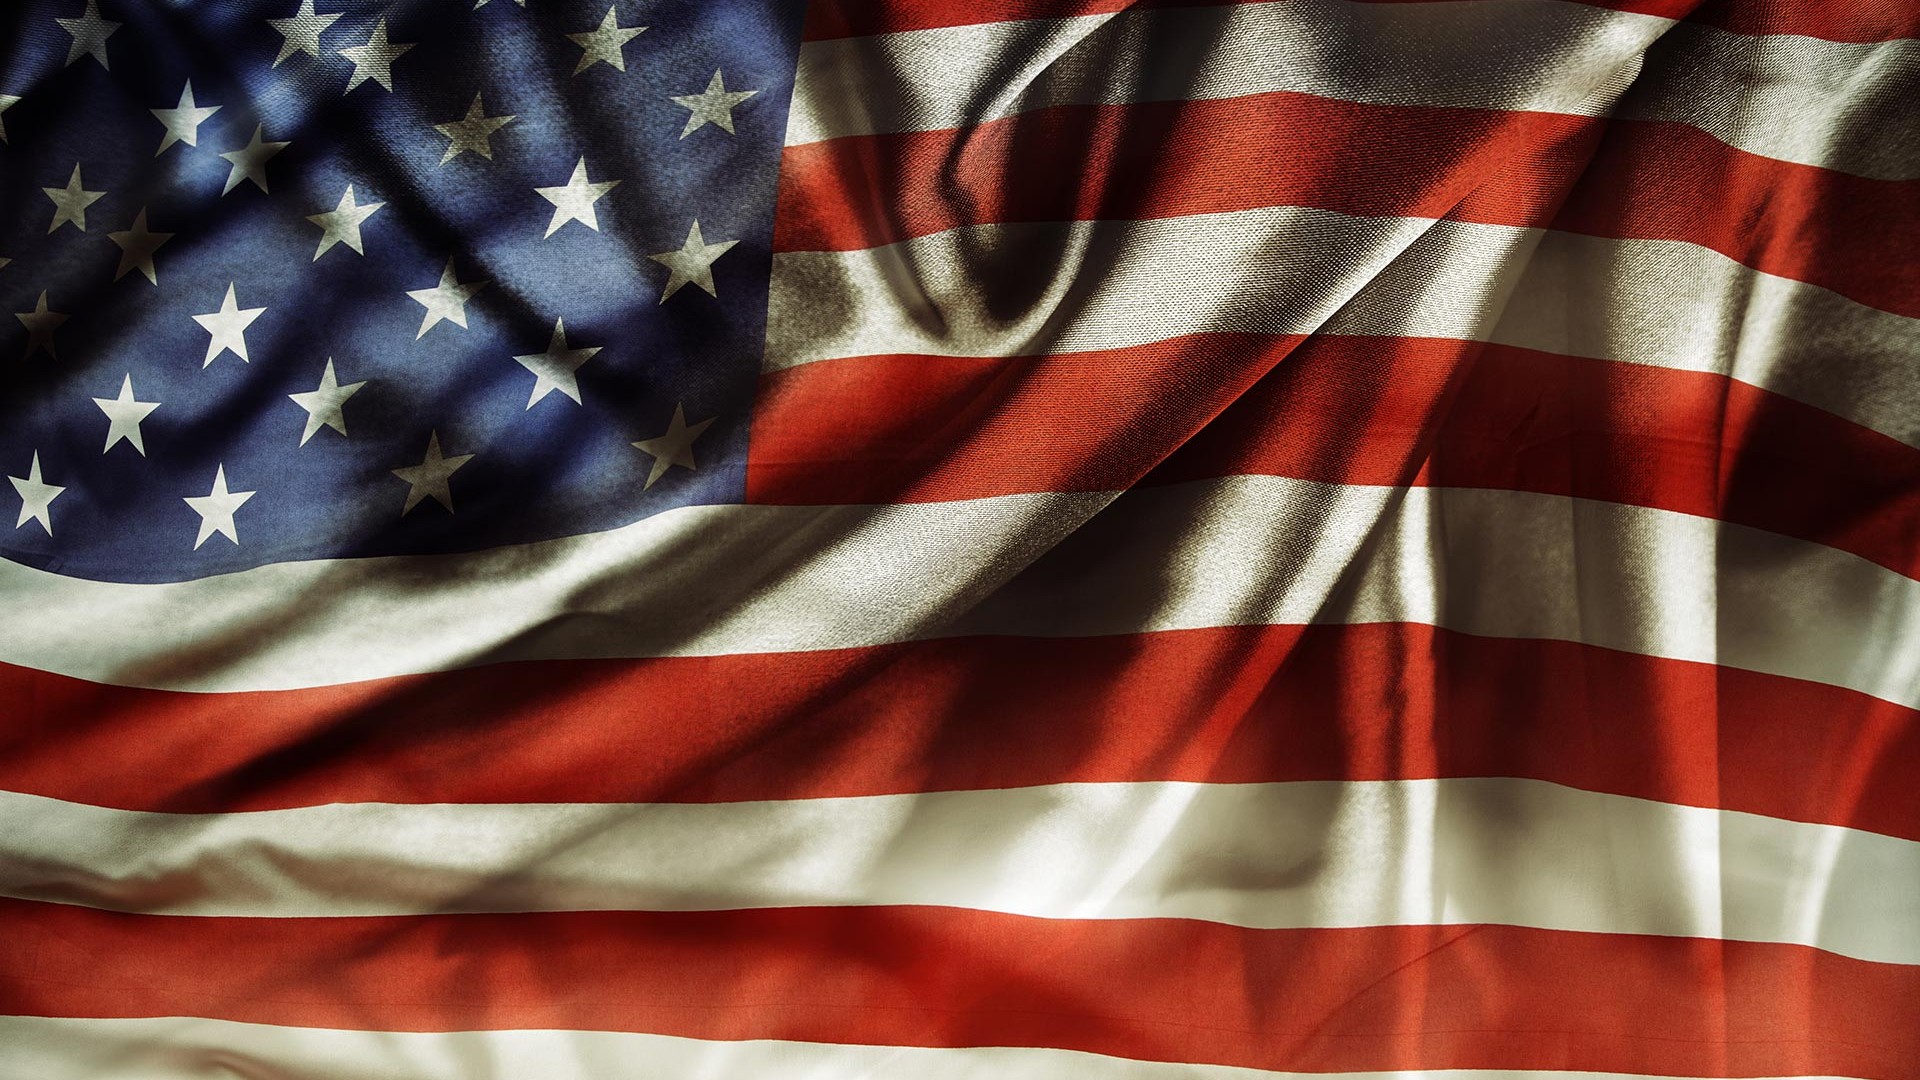 Best American Flag Wallpaper HD With high-resolution 1920X1080 pixel. You can use this wallpaper for your Desktop Computer Backgrounds, Mac Wallpapers, Android Lock screen or iPhone Screensavers and another smartphone device